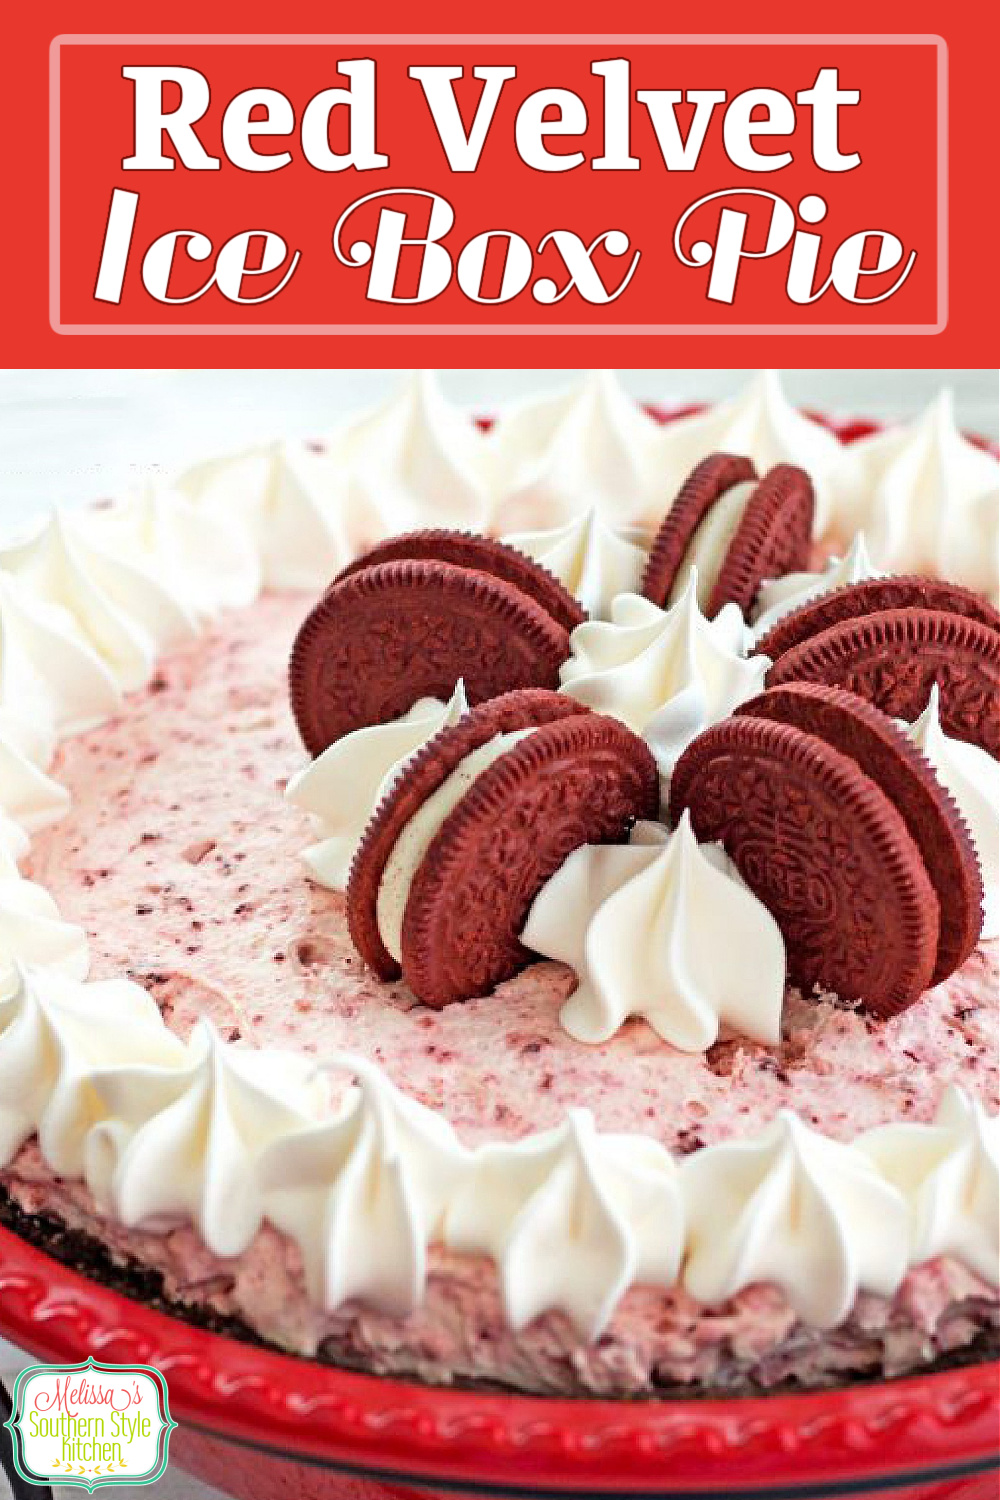 This delicious Red Velvet Ice box Pie is the ideal addition to your no-fuss desserts #redvelvet #redvelvetpie #chocolate #pies #pierecipes #redvelveticeboxpie #Oreos #chocolatepie #desserts #dessertfoodrecipes #southernfood #southernrecipes #iceboxpies #holidayrecipes #valentinesdaydesserts #christmasrecipes via @melissasssk